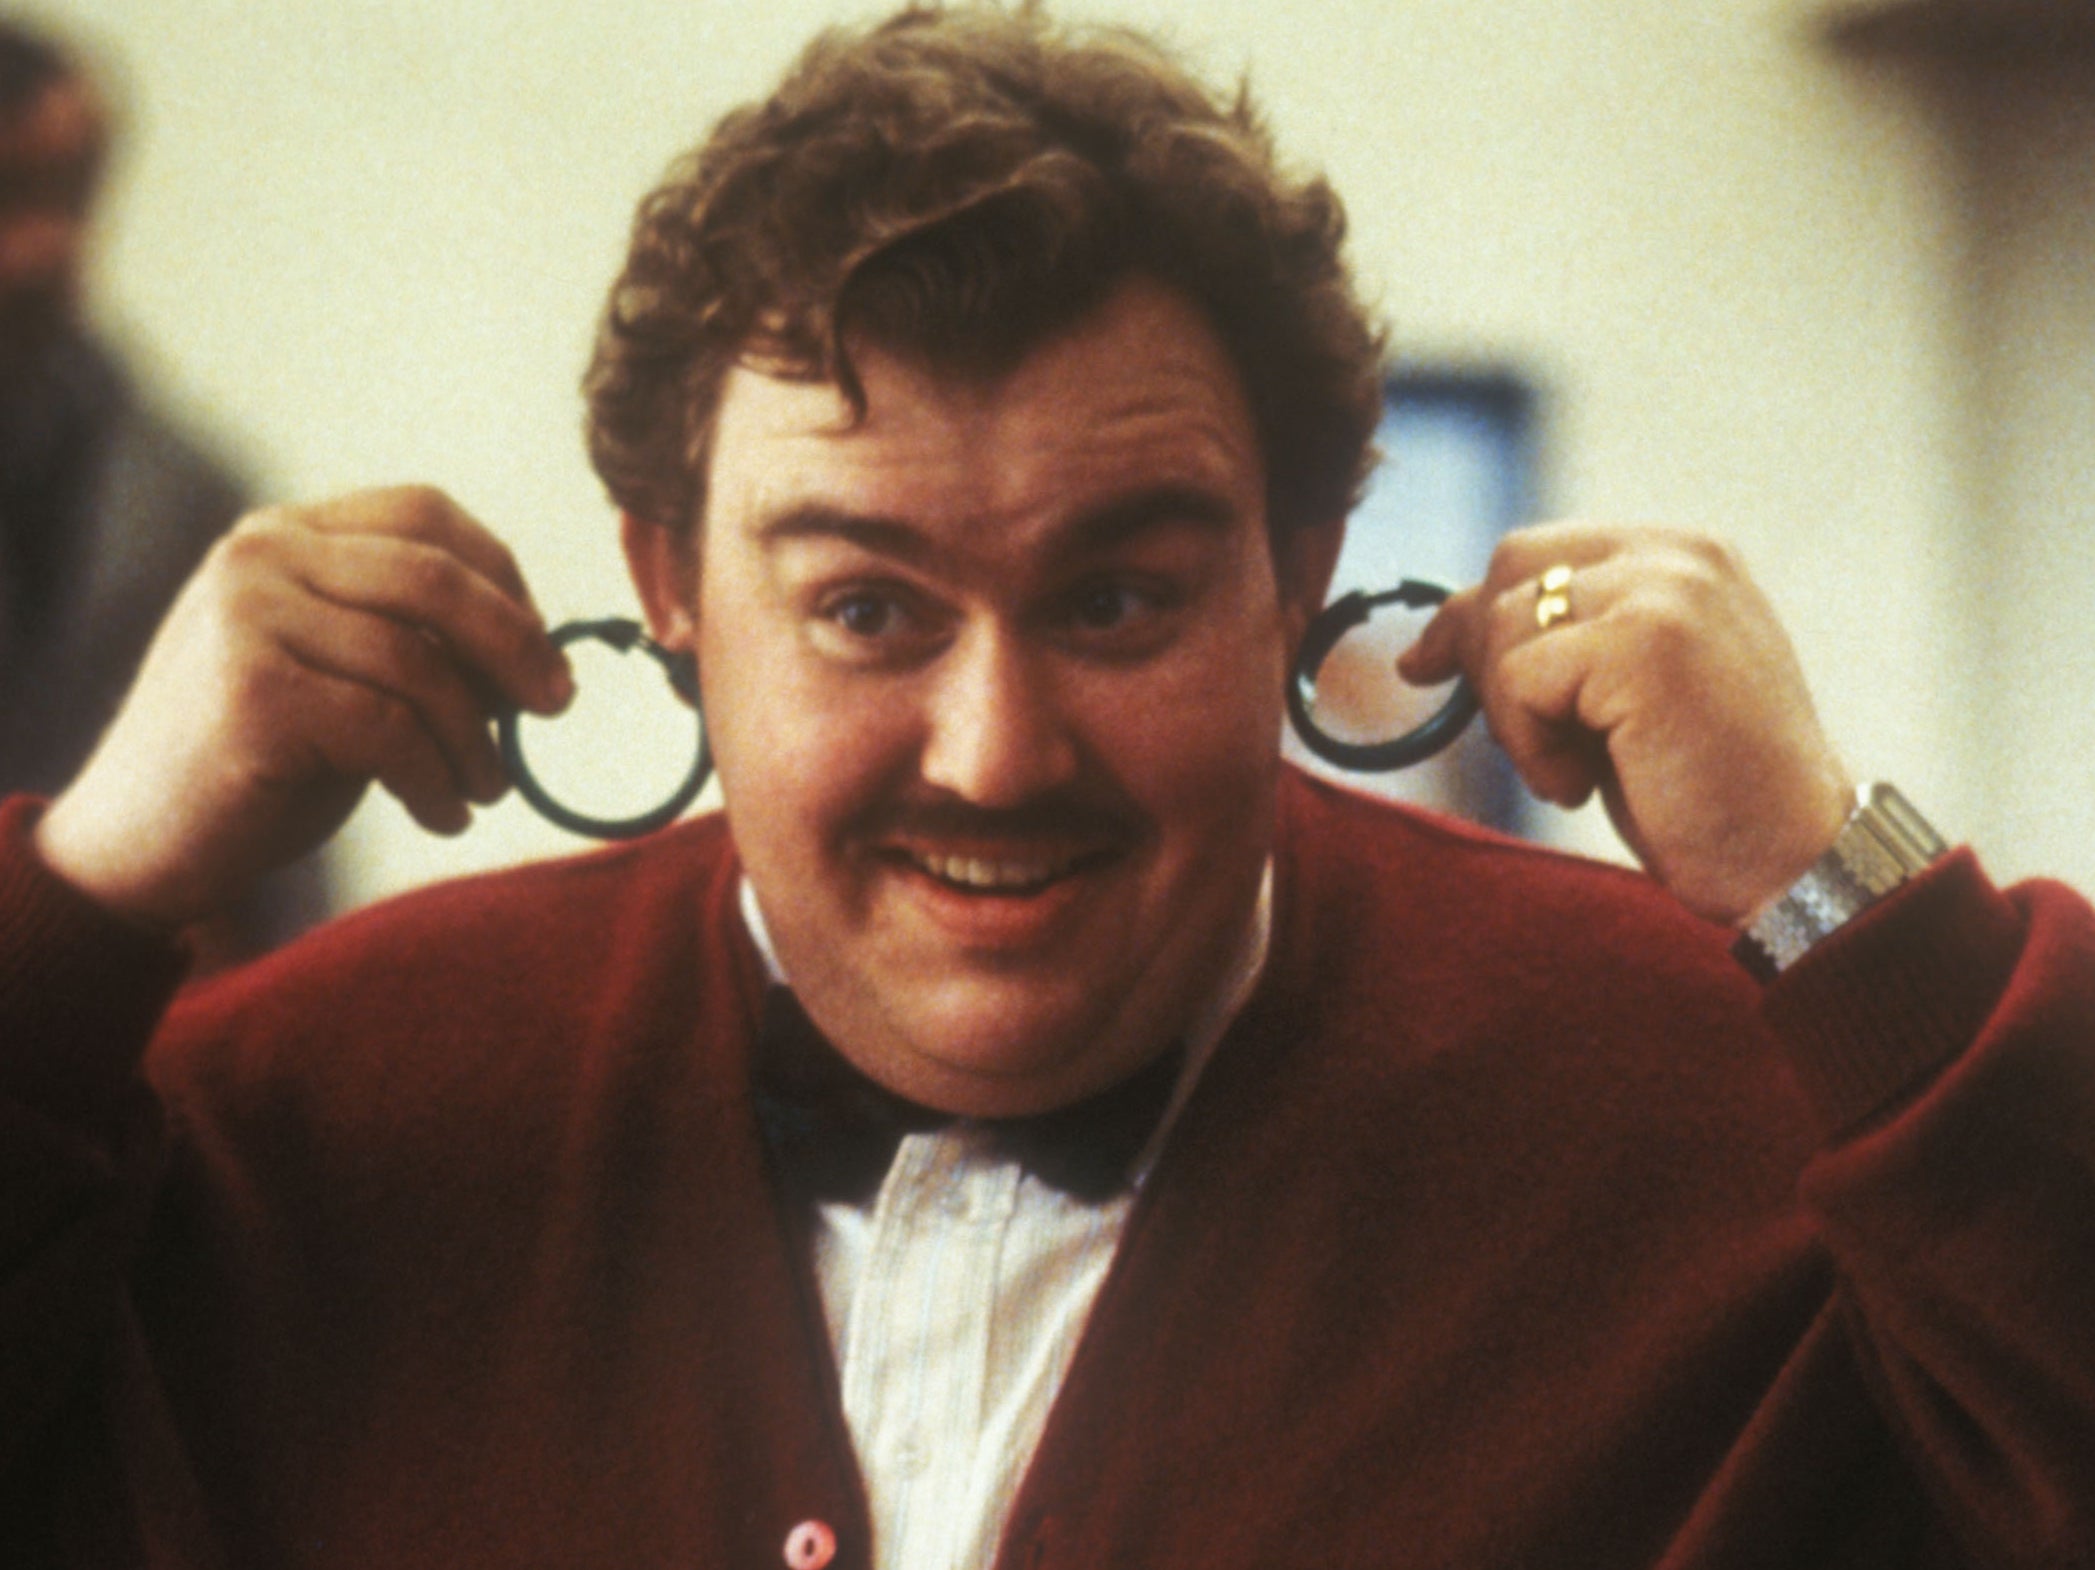 John Candy in Planes, Trains and Automobiles